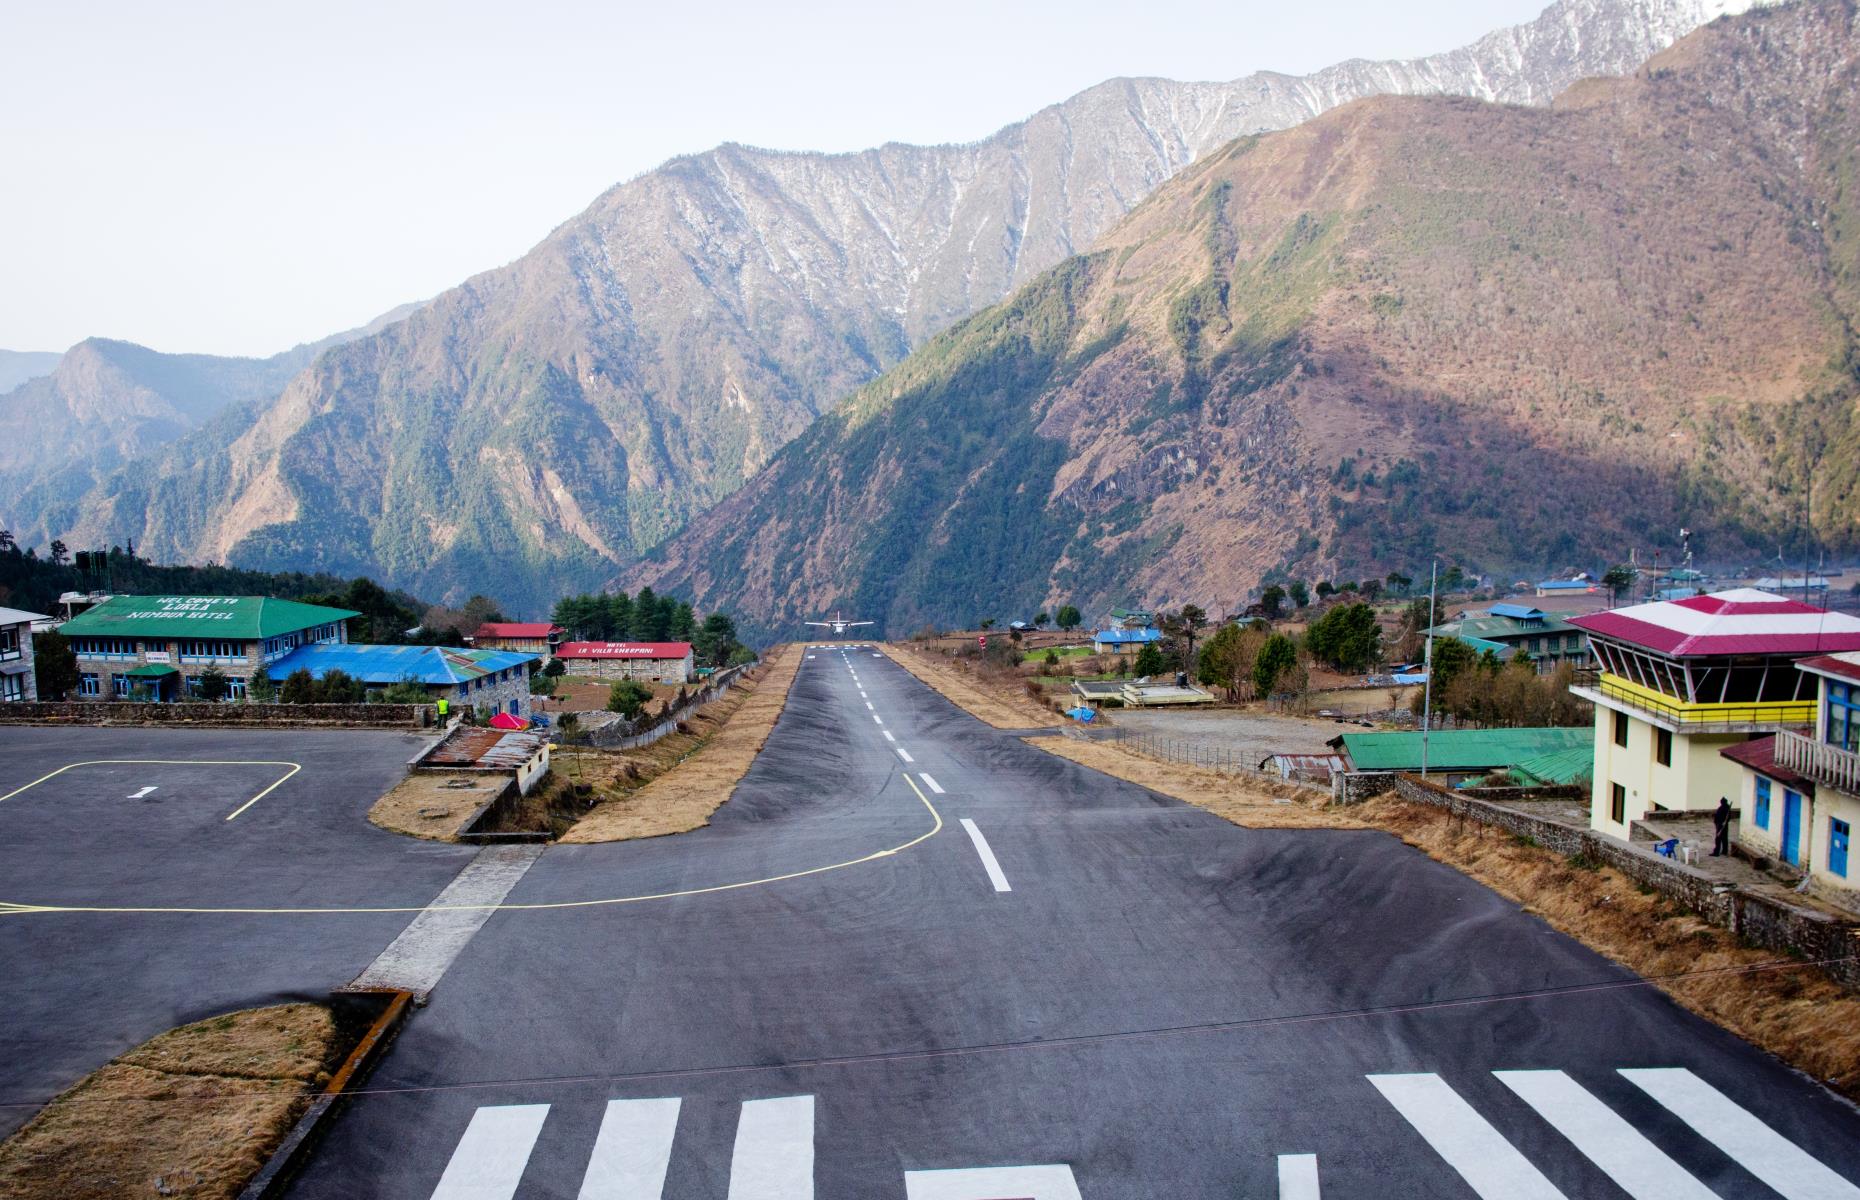 <p>Known as the gateway to Mount Everest, this tiny airport in Nepal is one of the best in the world for its dramatic views on landing and take-off. Its terrifyingly small 1,729-foot (527m) runway is perched on a cliff, with a 2,000-foot (609m) drop to the bottom.</p>